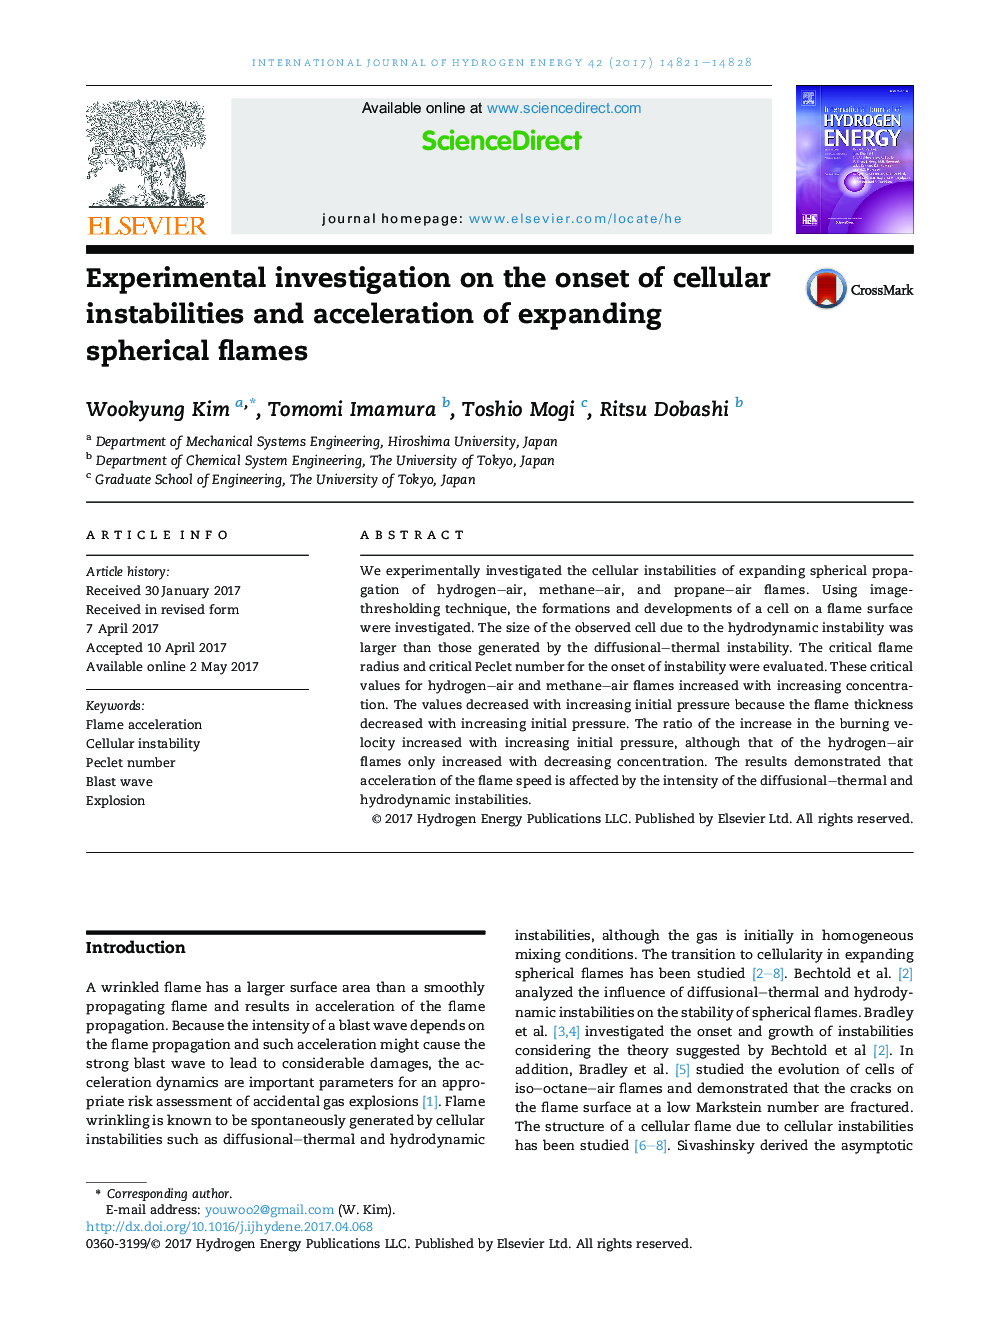 Experimental investigation on the onset of cellular instabilities and acceleration of expanding spherical flames